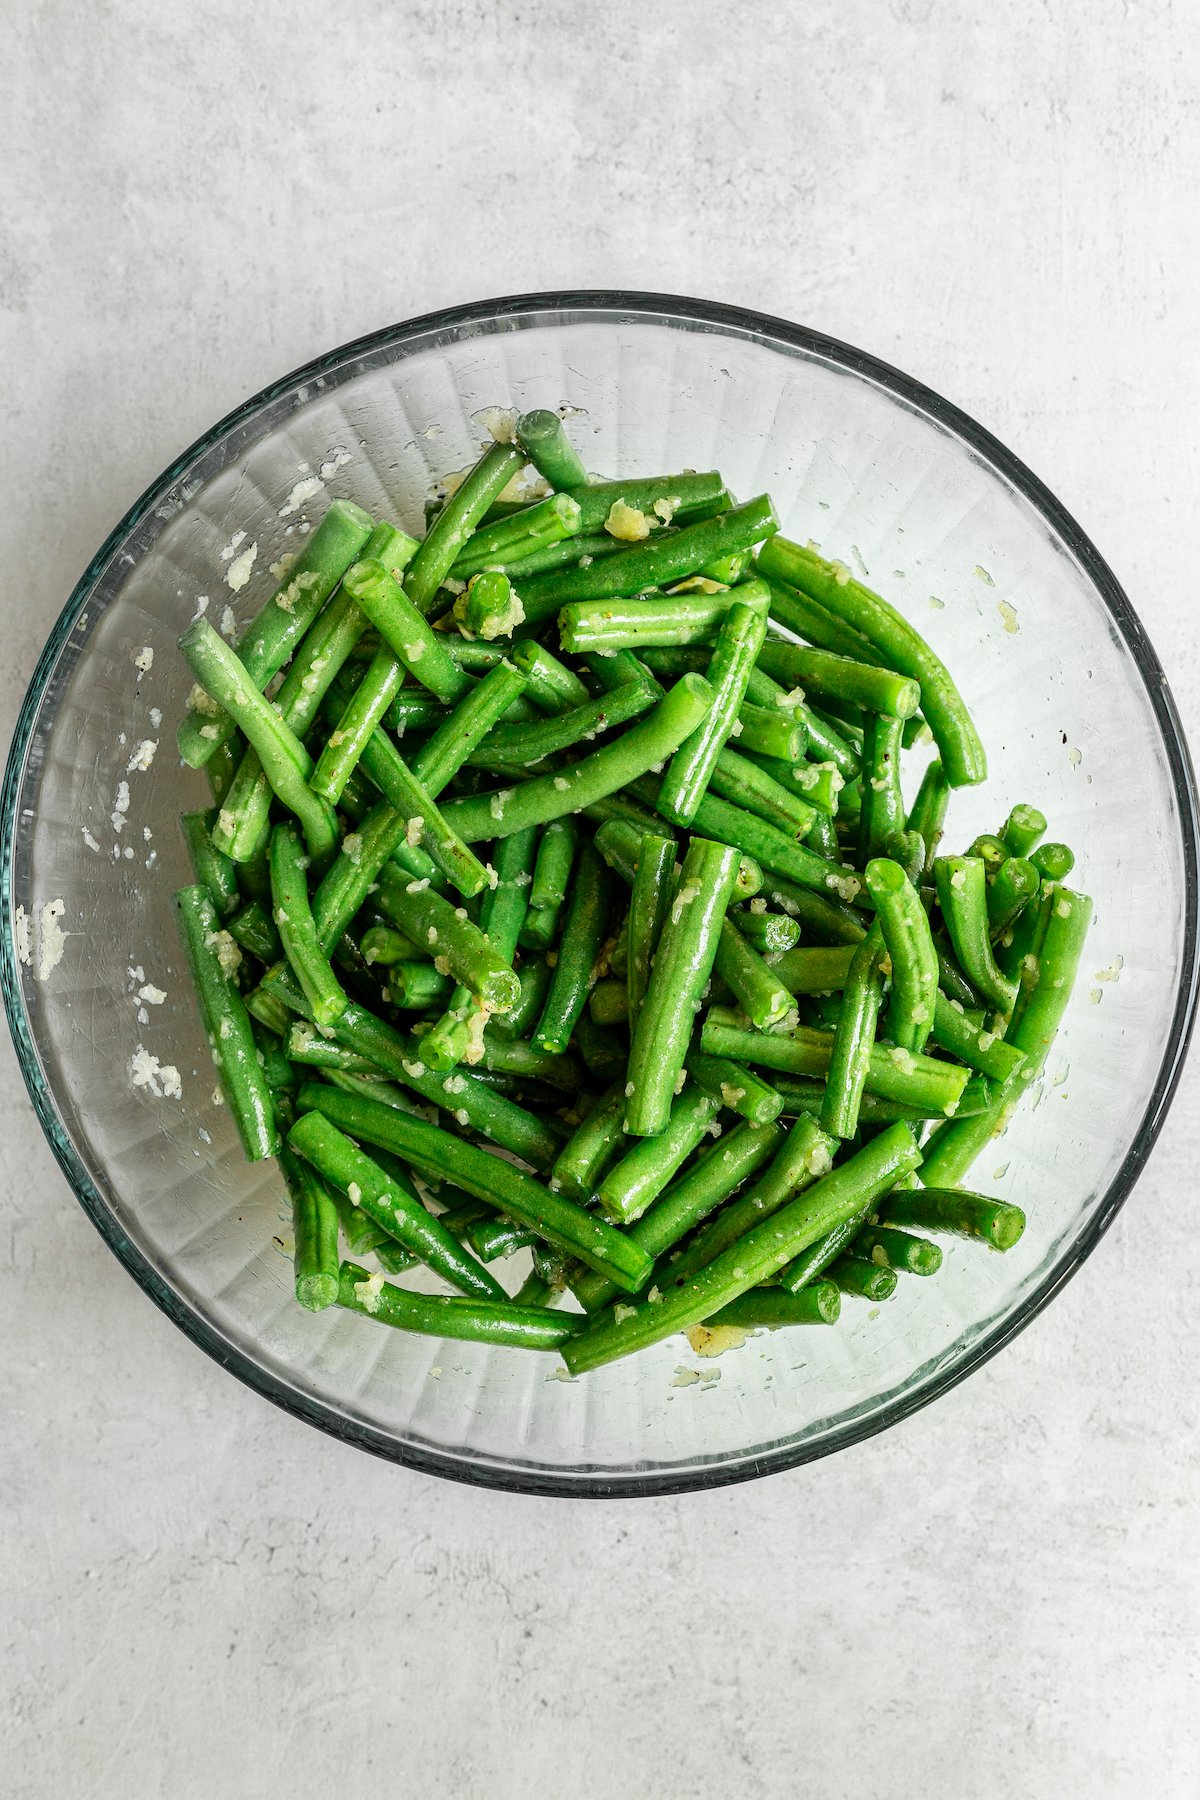 Seasoned raw green beans in a glass mixing bowl.